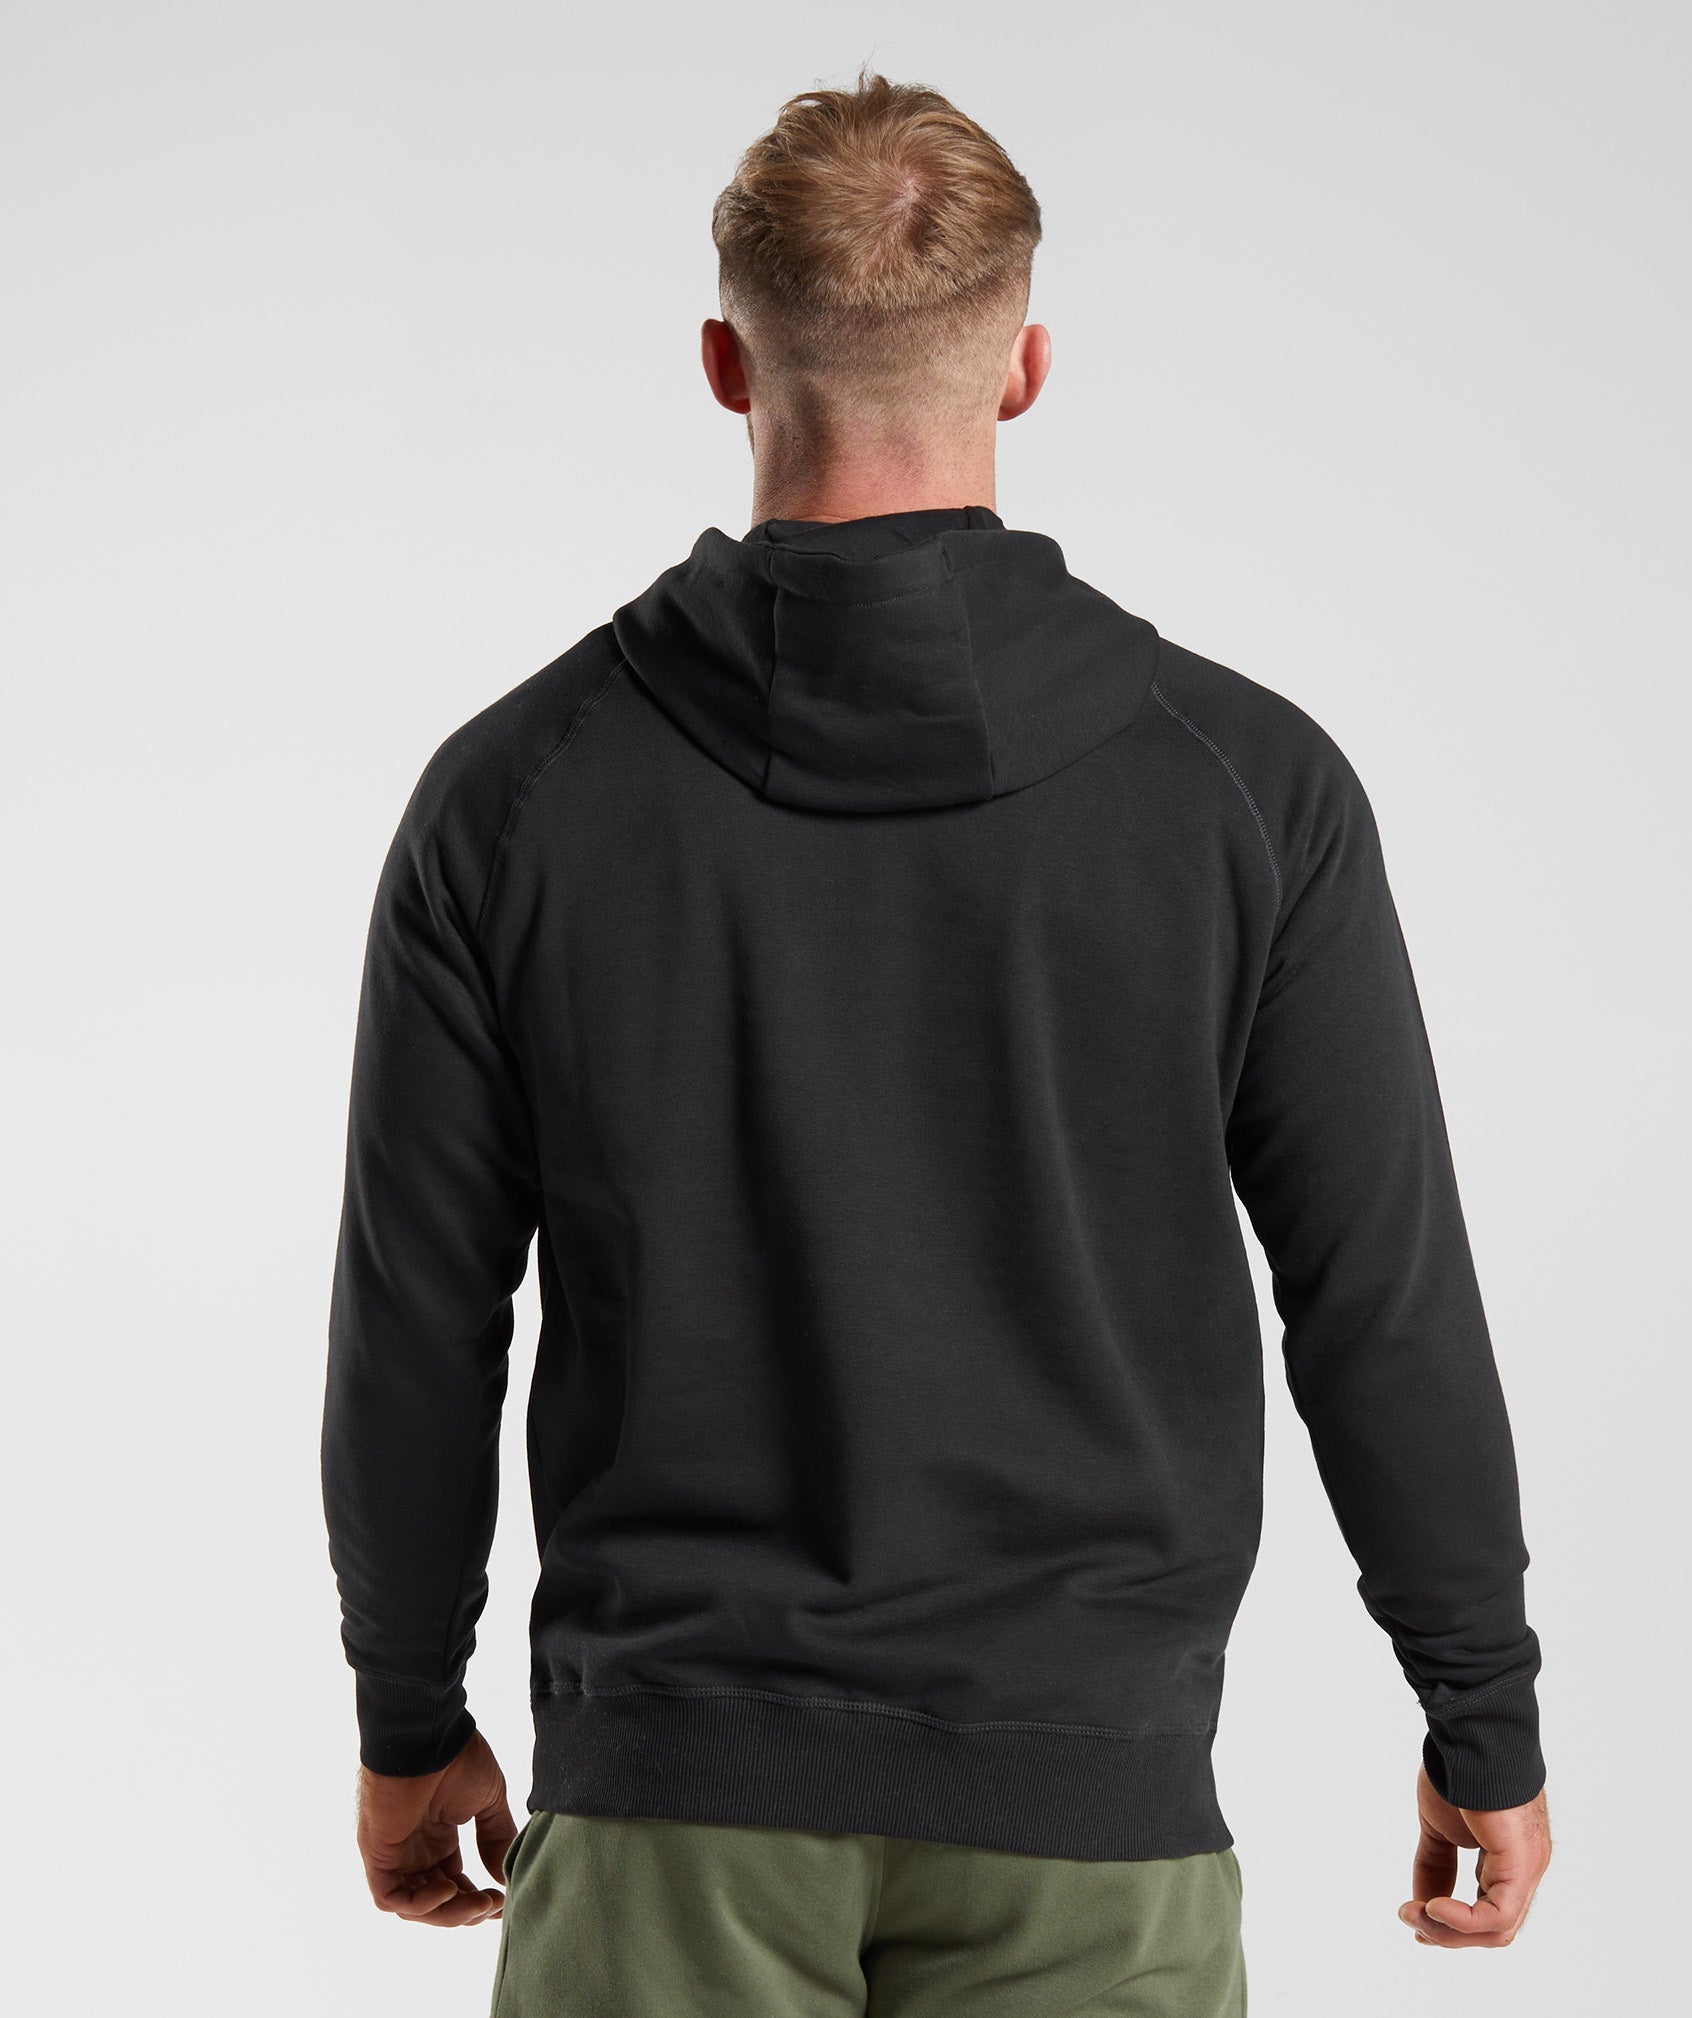 Apollo Hoodie in Black - view 2